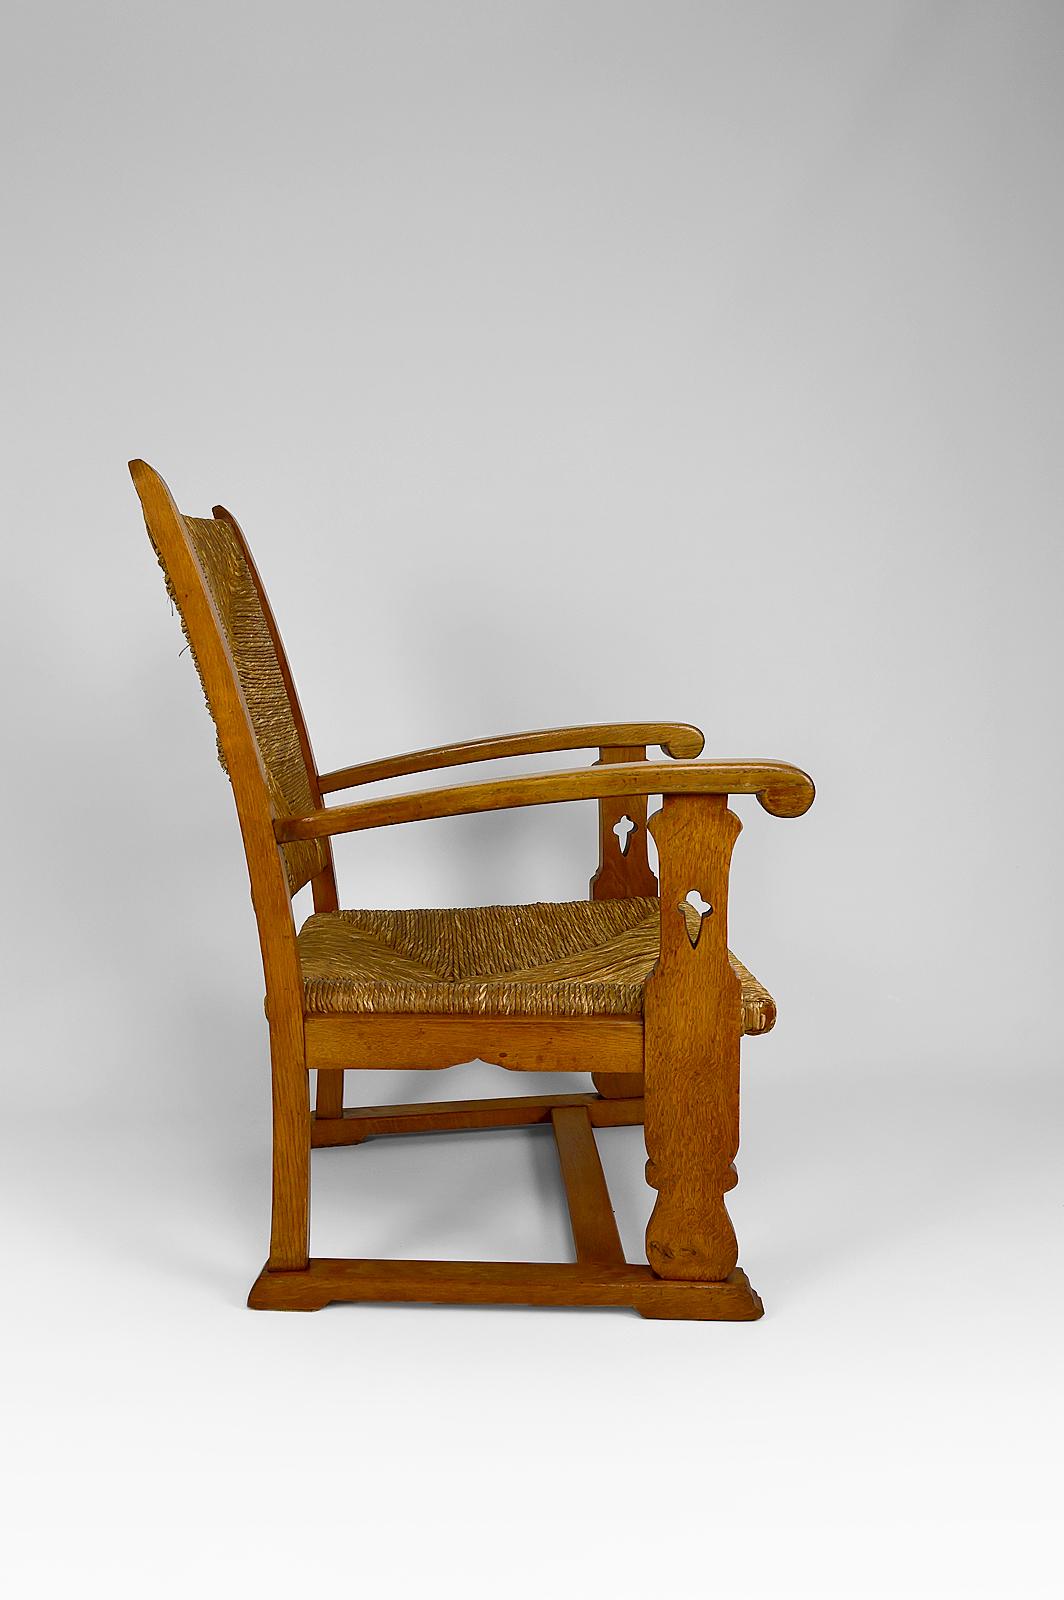 Early 20th Century Art & Crafts / Gothic Revival Armchair in Oak and Straw, circa 1900